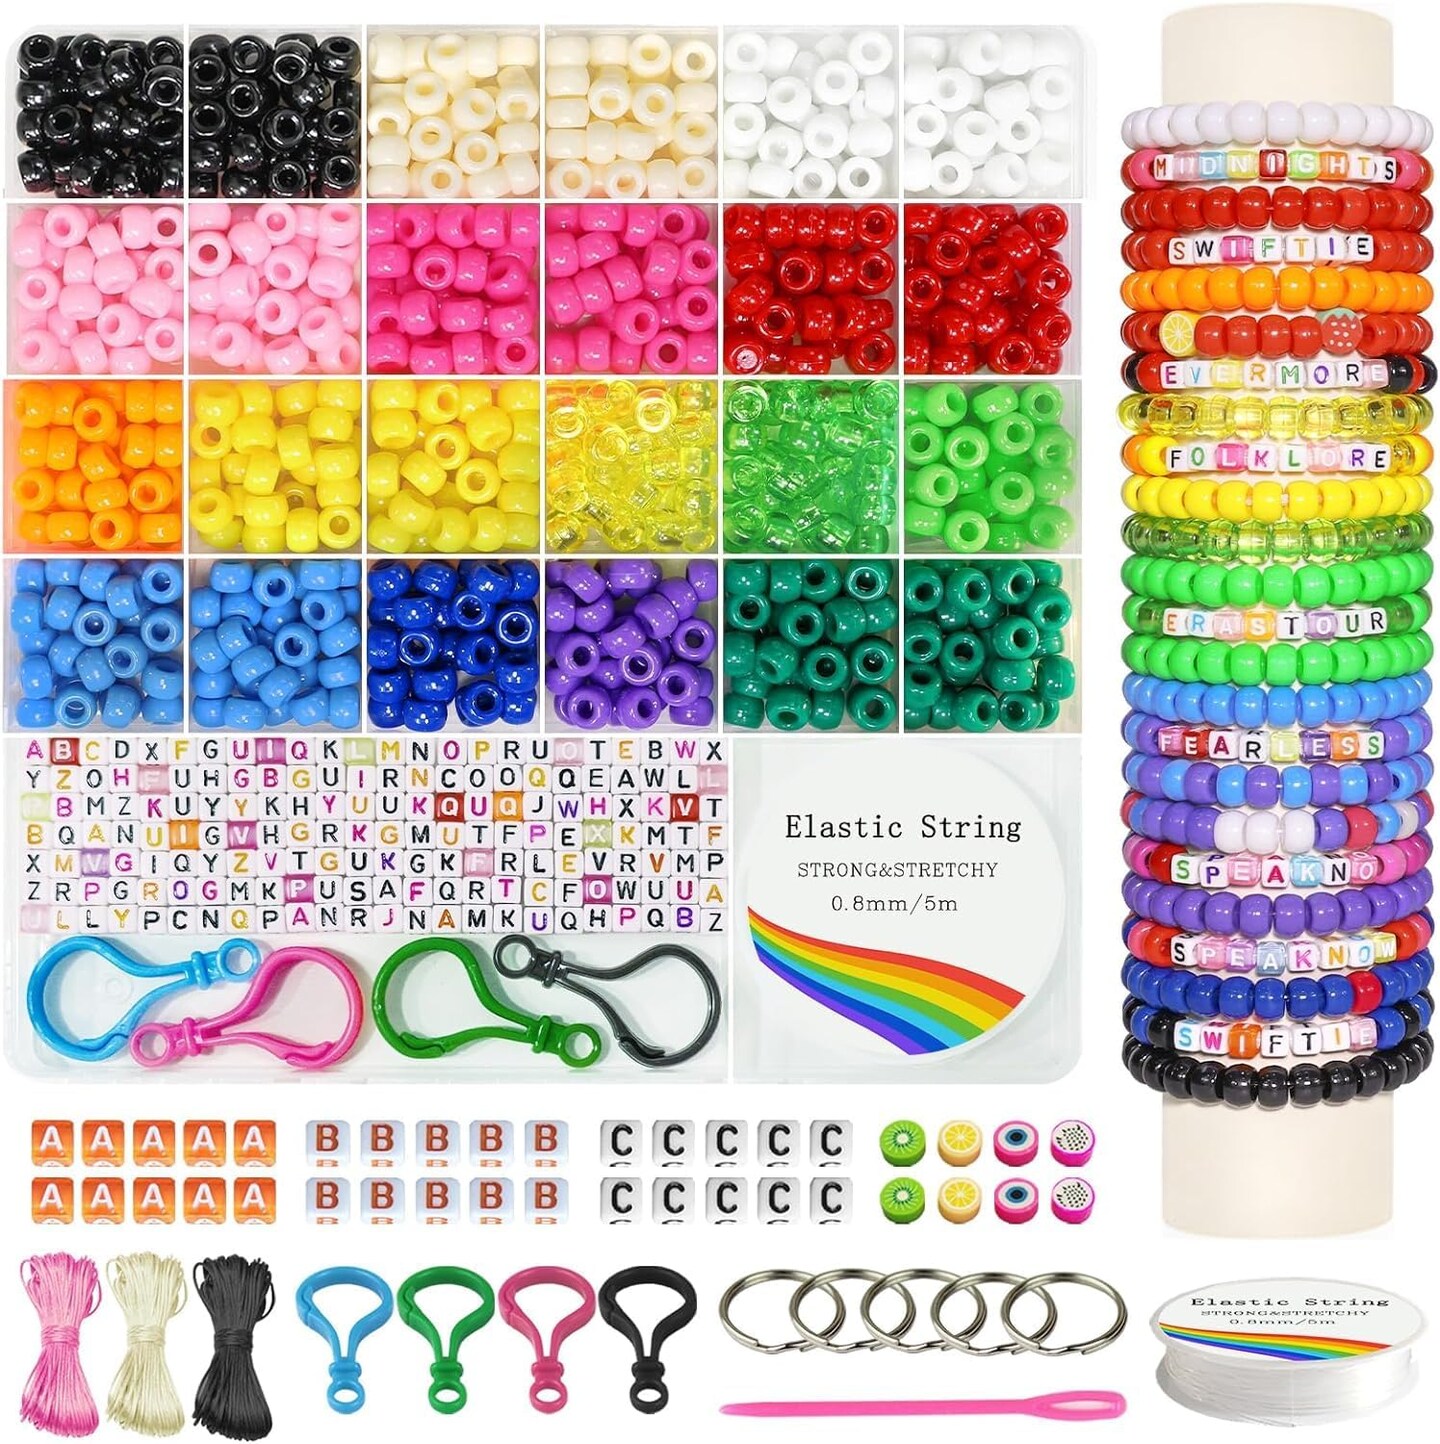 Friendship Bracelet Making Kit, Kandi Pony Beads for Jewelry Making, Hair Beads Braids with Letter Beads and Charms Gifts for Teen Girls Crafts for Girls Ages 8-12 (15colors 1box)